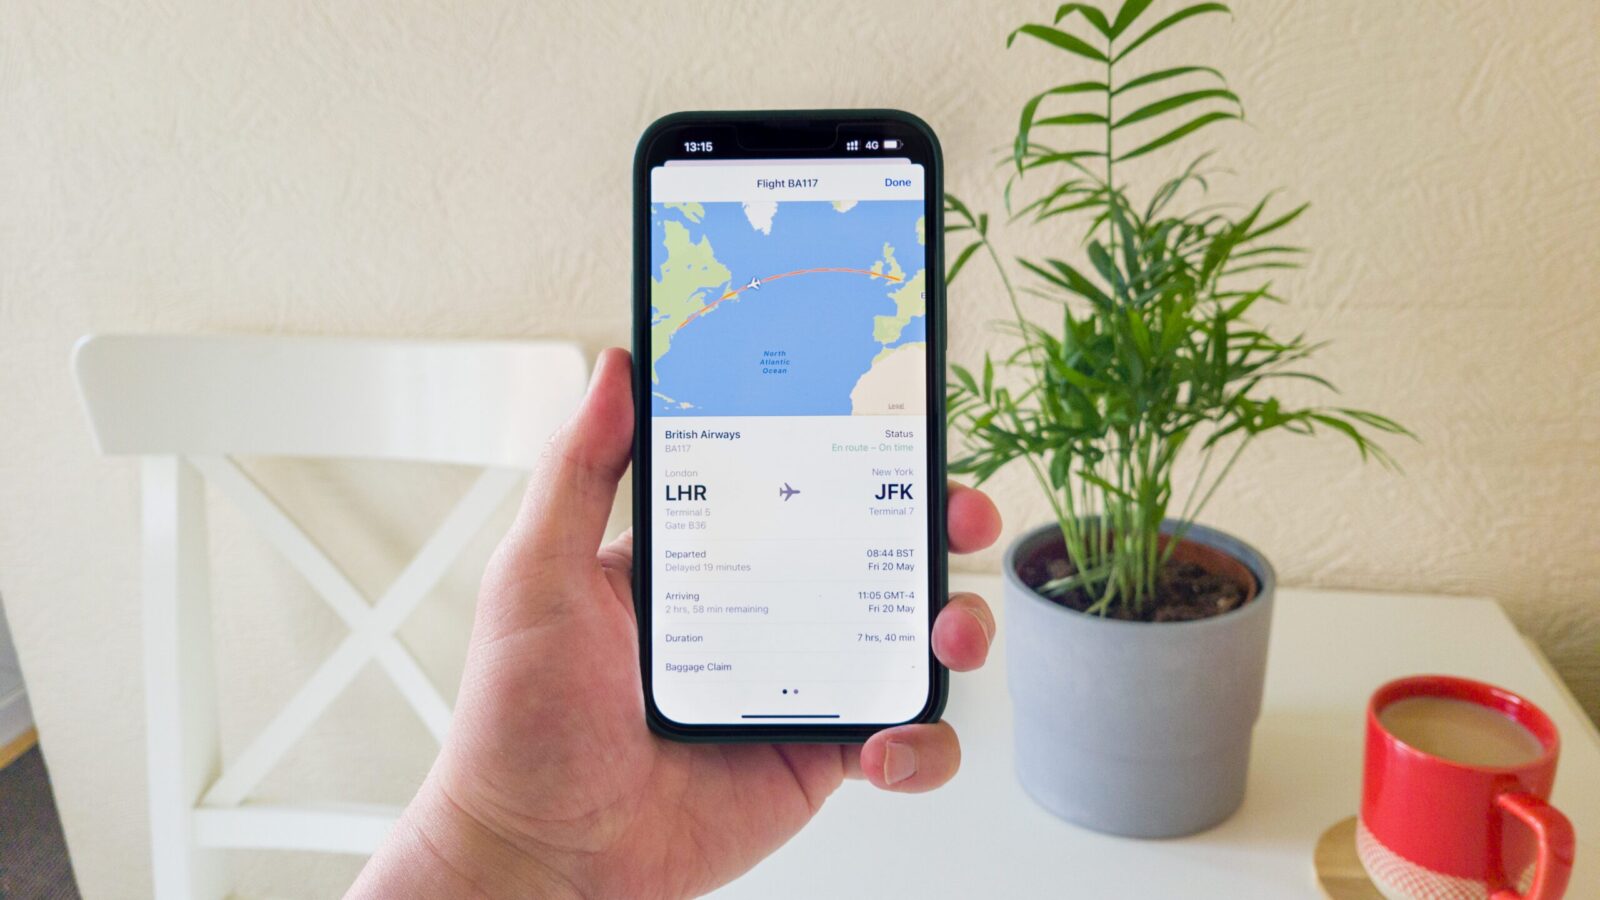 How to Track Southwest Flight on Iphone